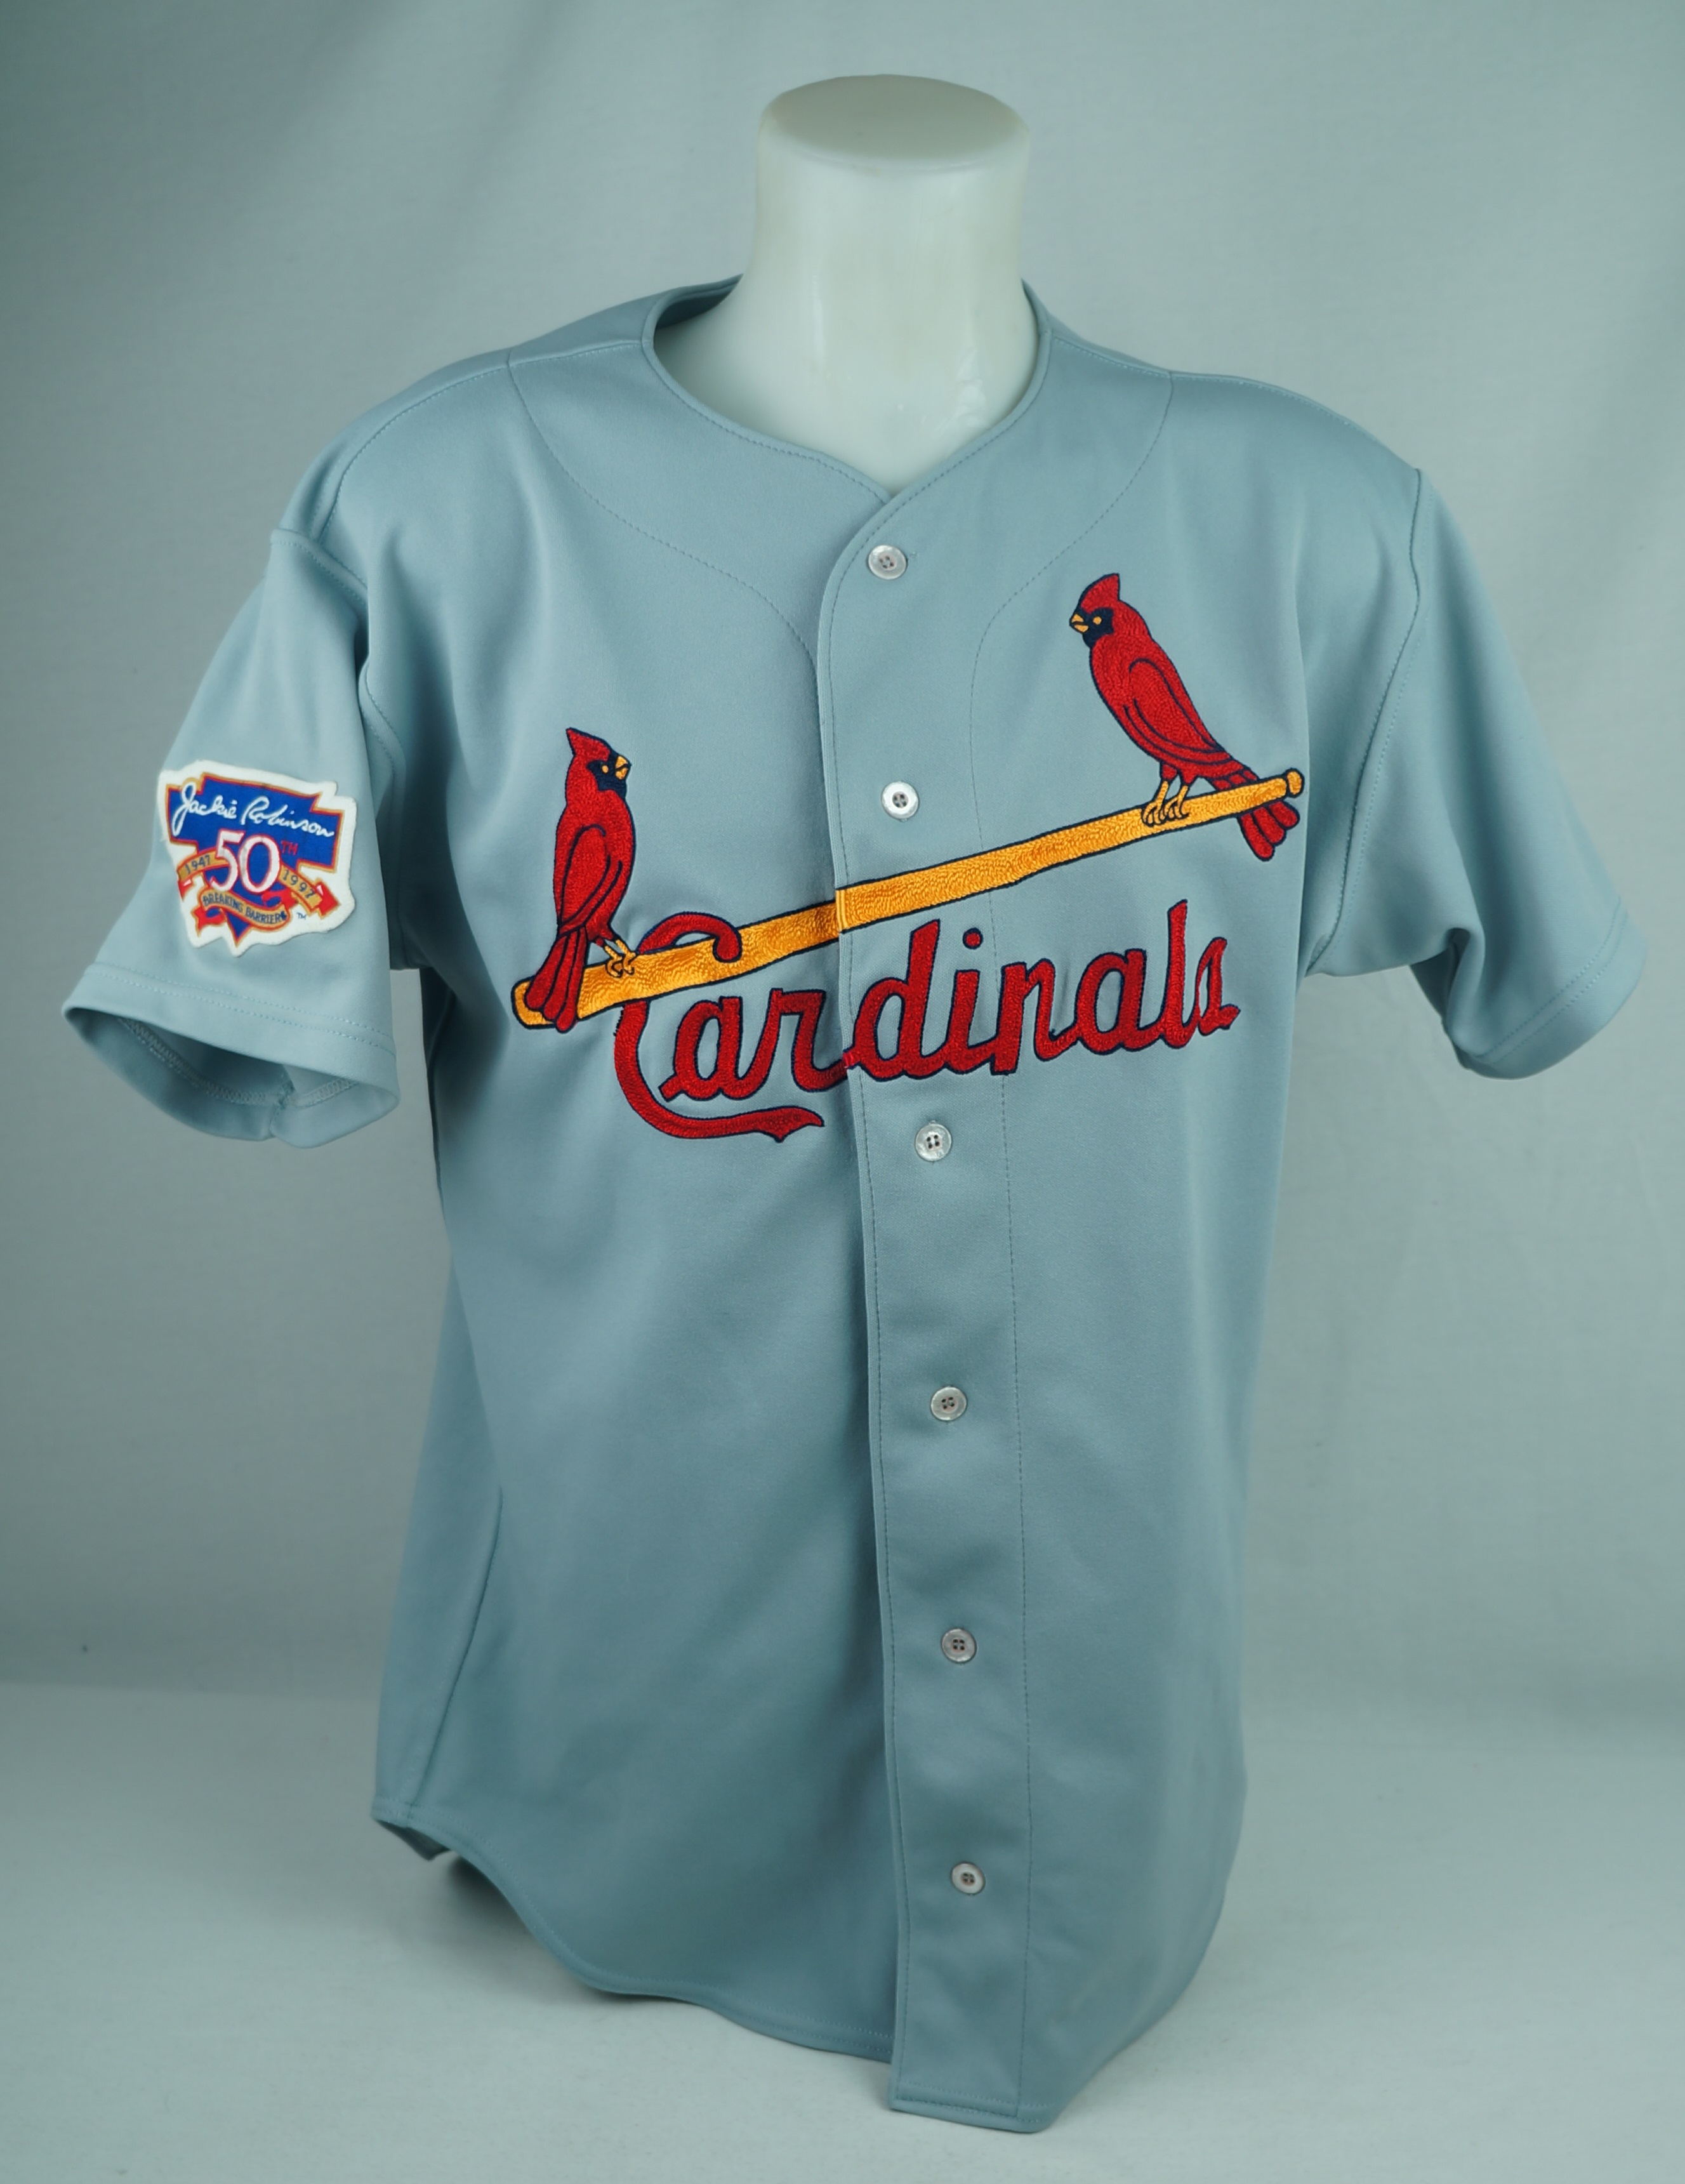 st louis game used